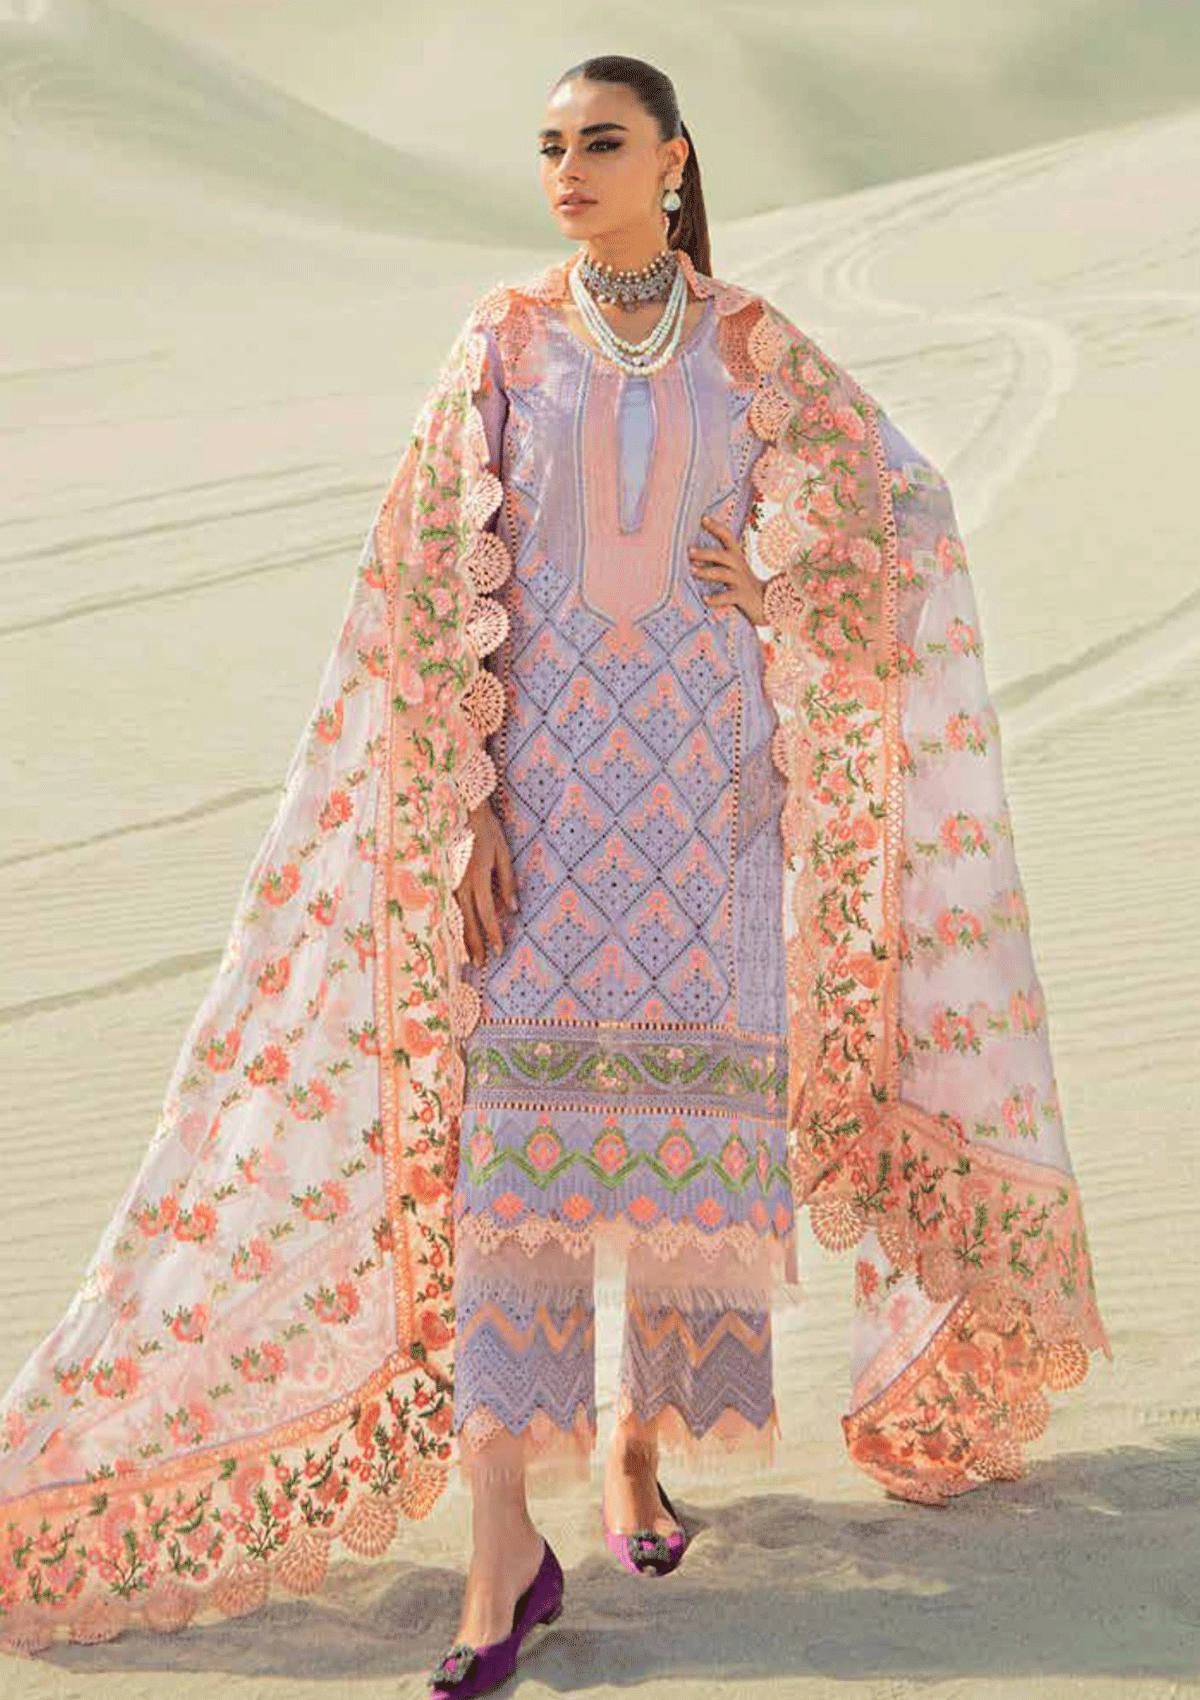 Shop Now, Lily - Luxury Lawn 2023 - Vol.2 - Maryam Hussain - Shahana Collection UK - Wedding and Bridal Party Dresses 